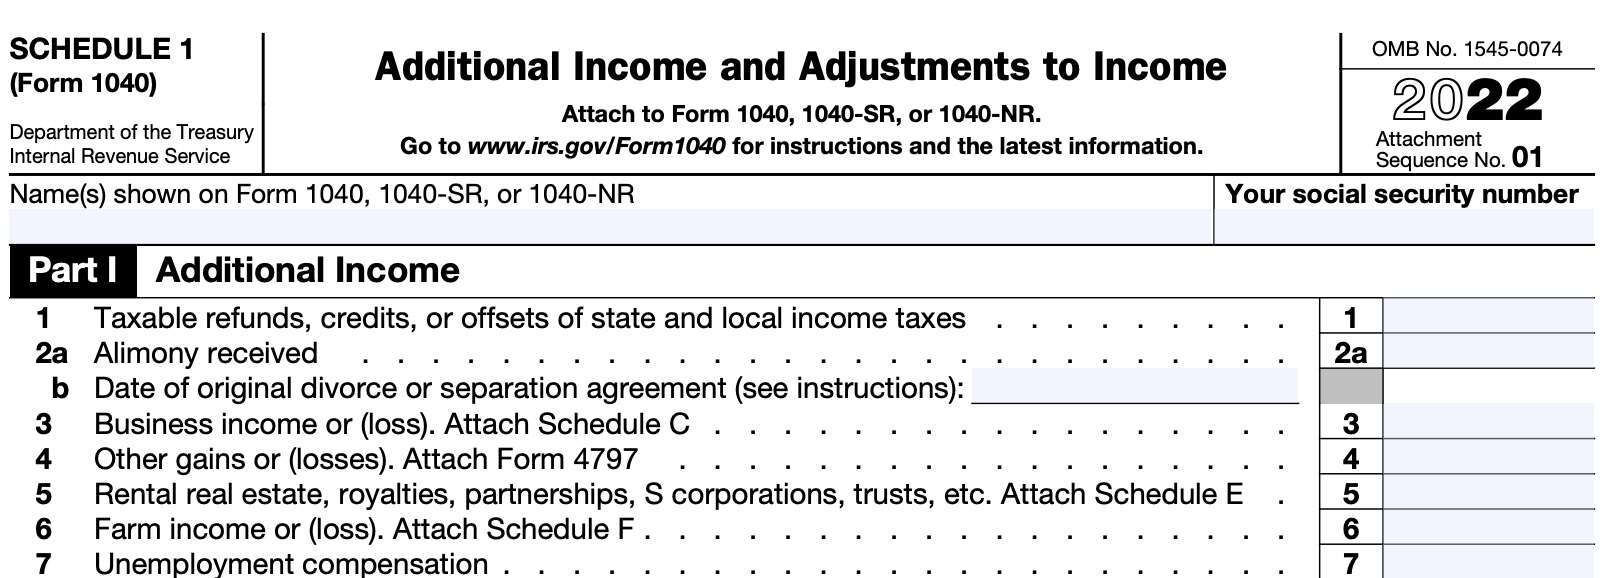 irs schedule 1, part i: additional income, lines 1 through 7